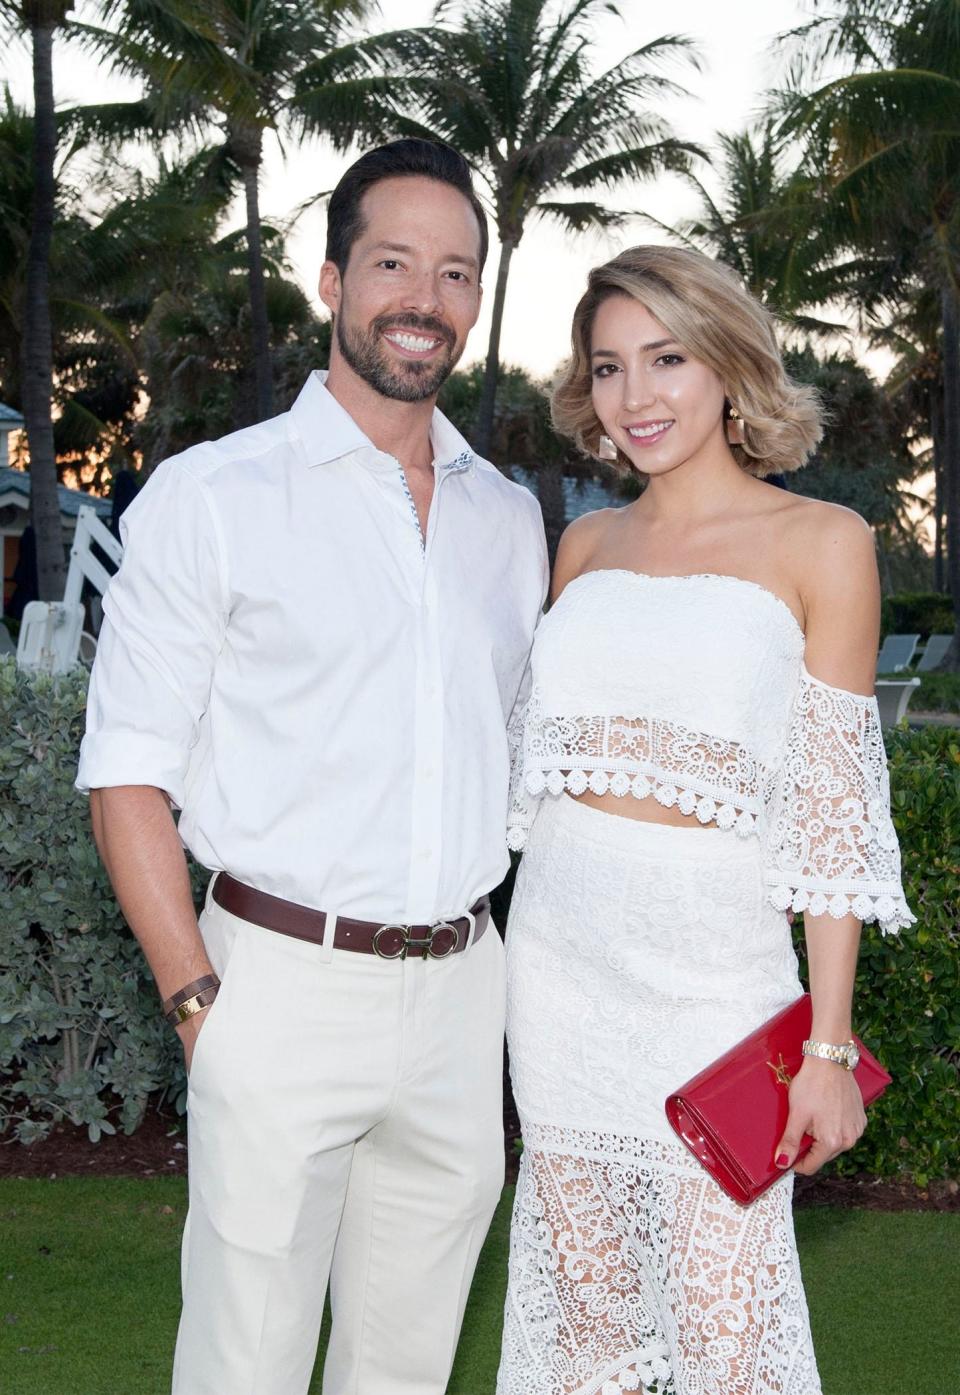 Josh Perreco and Manuela Yanez at the Boys & Girls Clubs of Palm Beach County 18th Annual Barefoot on the Beach at The Breakers in April 2019. The 22nd annual event is set for April 5 at The Breakers.